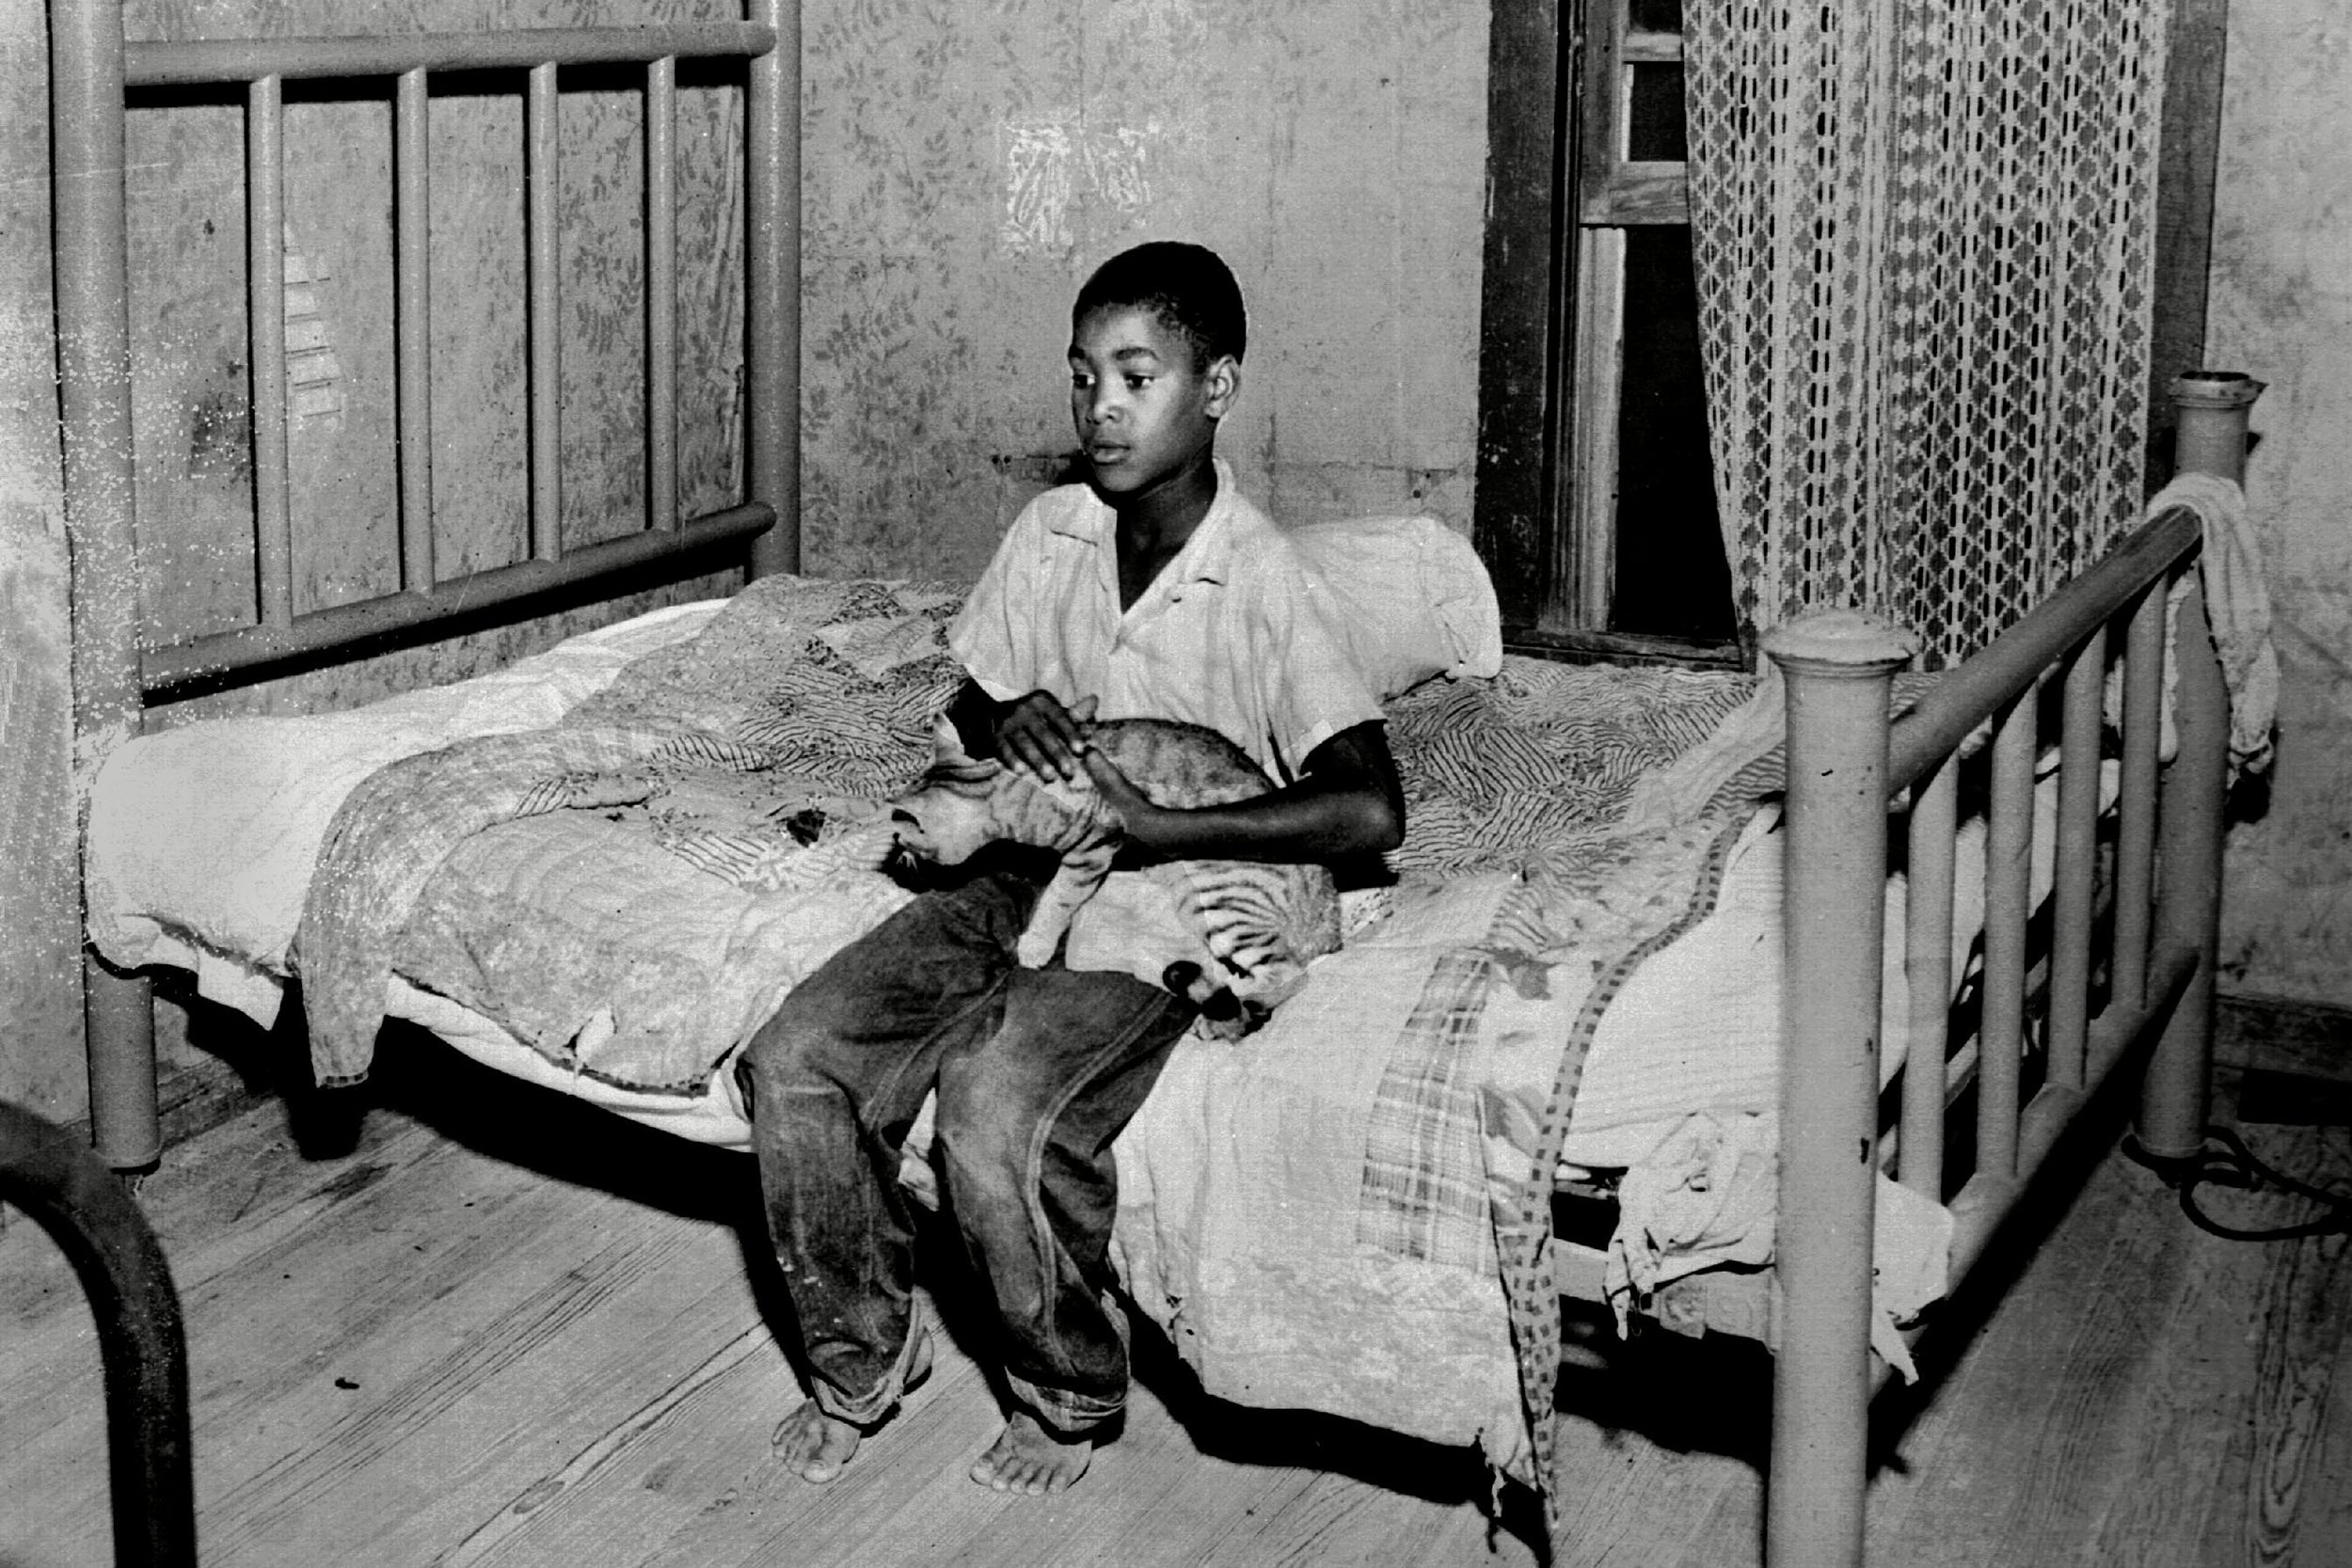 Simeon Wright at the Mississippi home where his cousin Emmett Till was abducted in August 1955